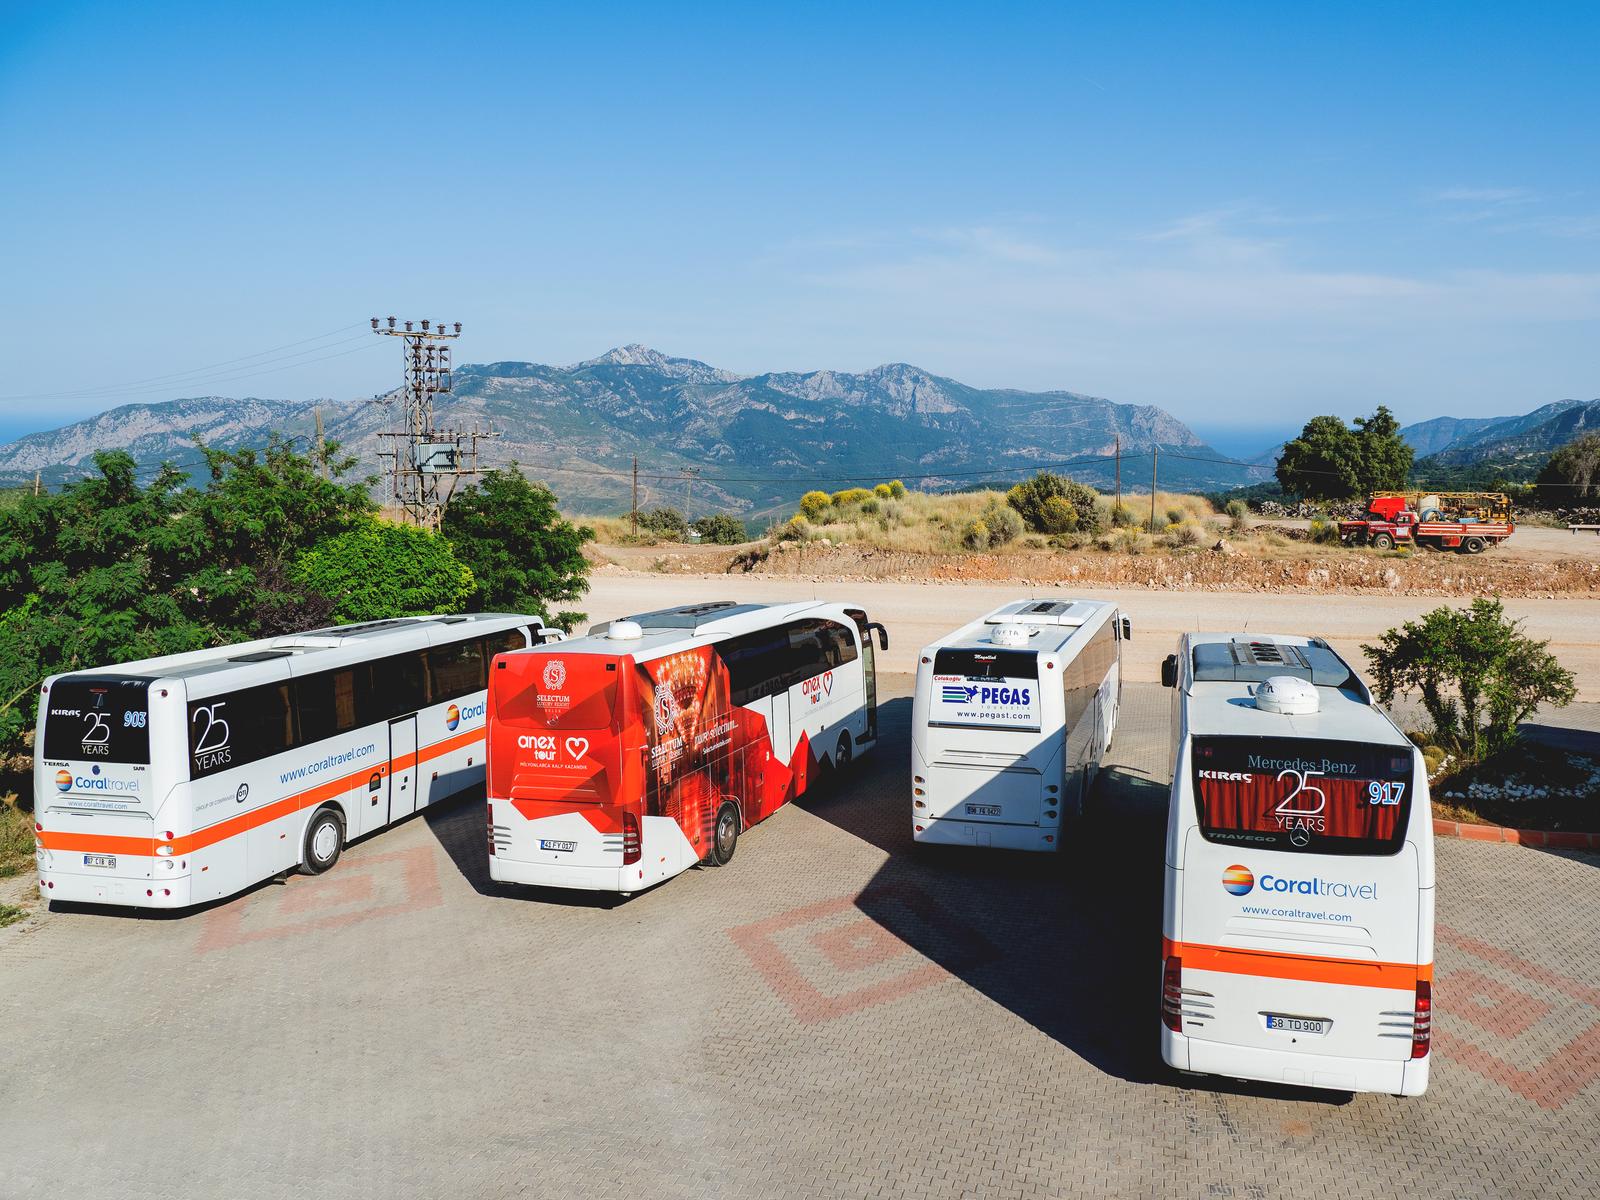 KEMER, TURKEY - May 16, 2018. Touristic buses on parking. Coral travel, Anex tour, Pegas travel agency's transport for tourist excursions.